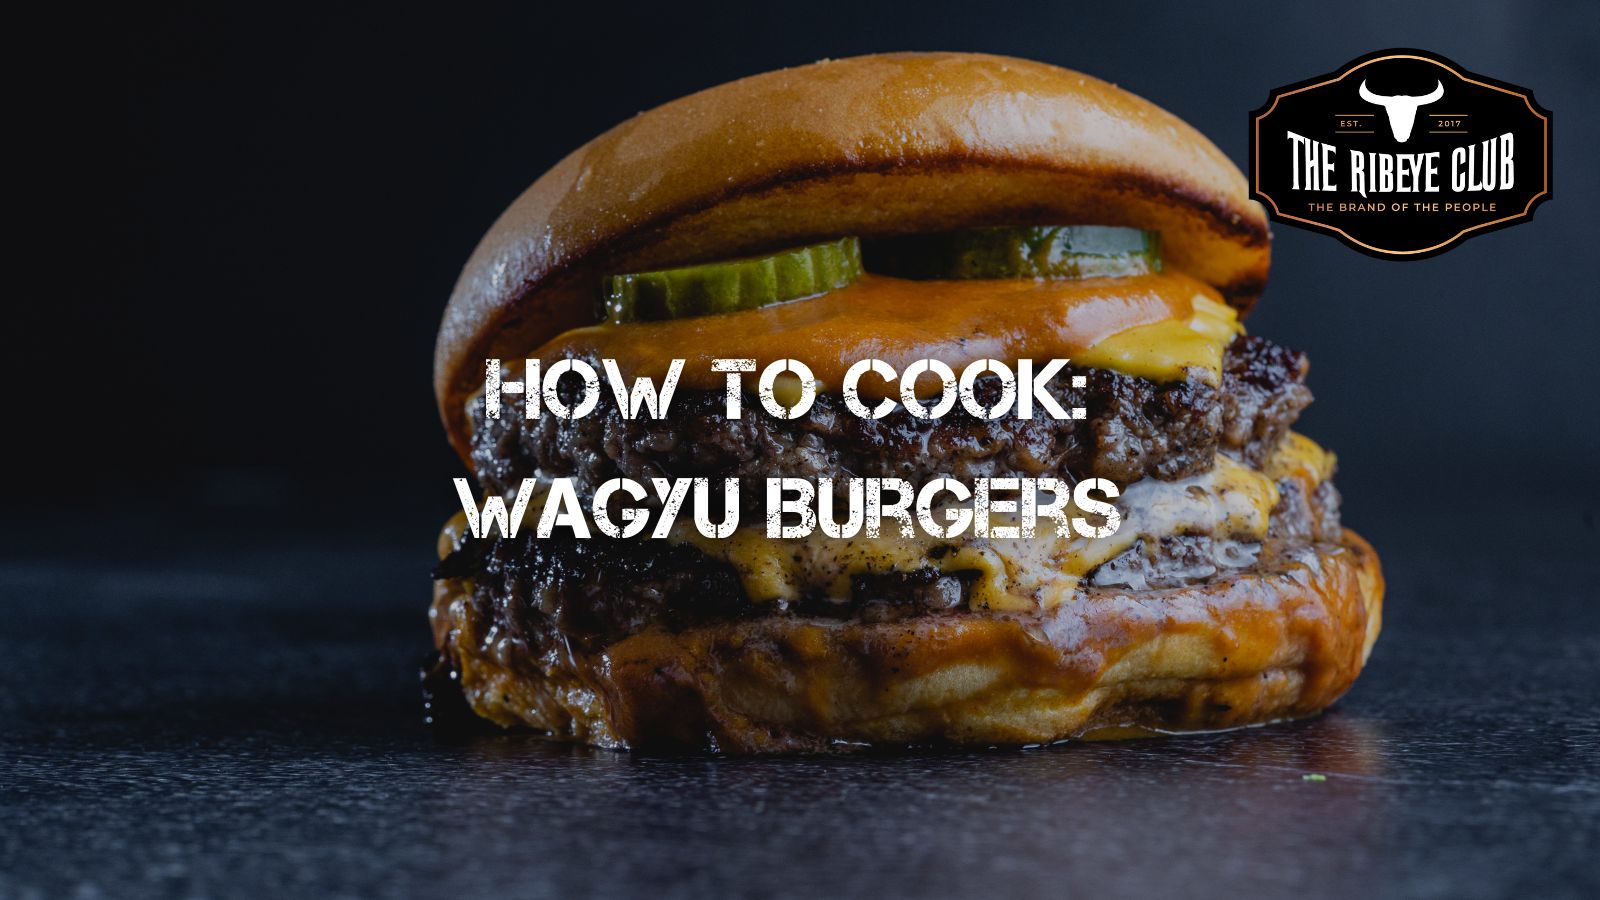 How to Cook: Wagyu Burgers